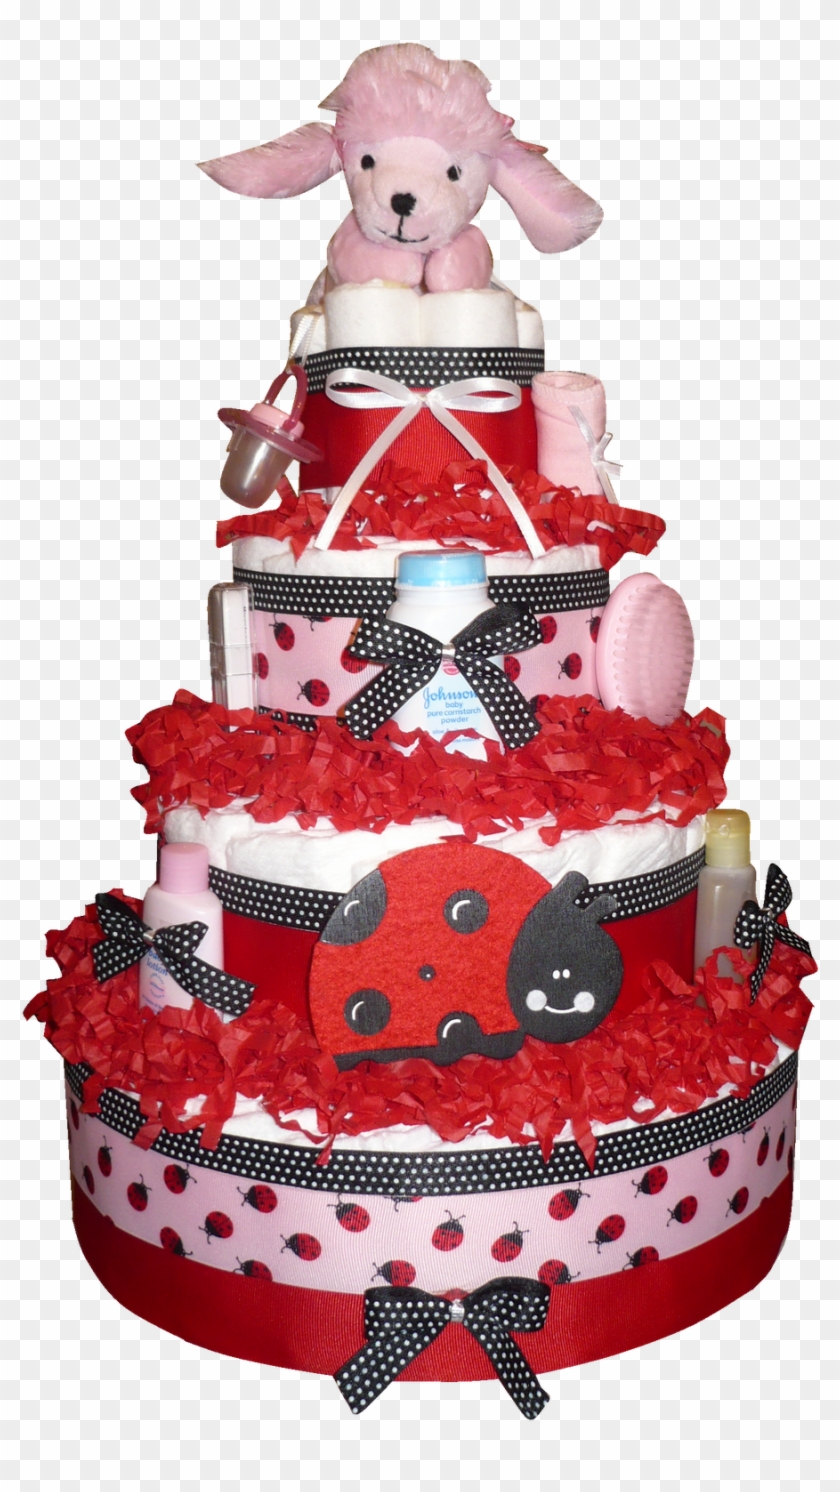 Ladies Birthday Cake Maker Shop Store In London Makers - Cake Decorating Clipart #2469801